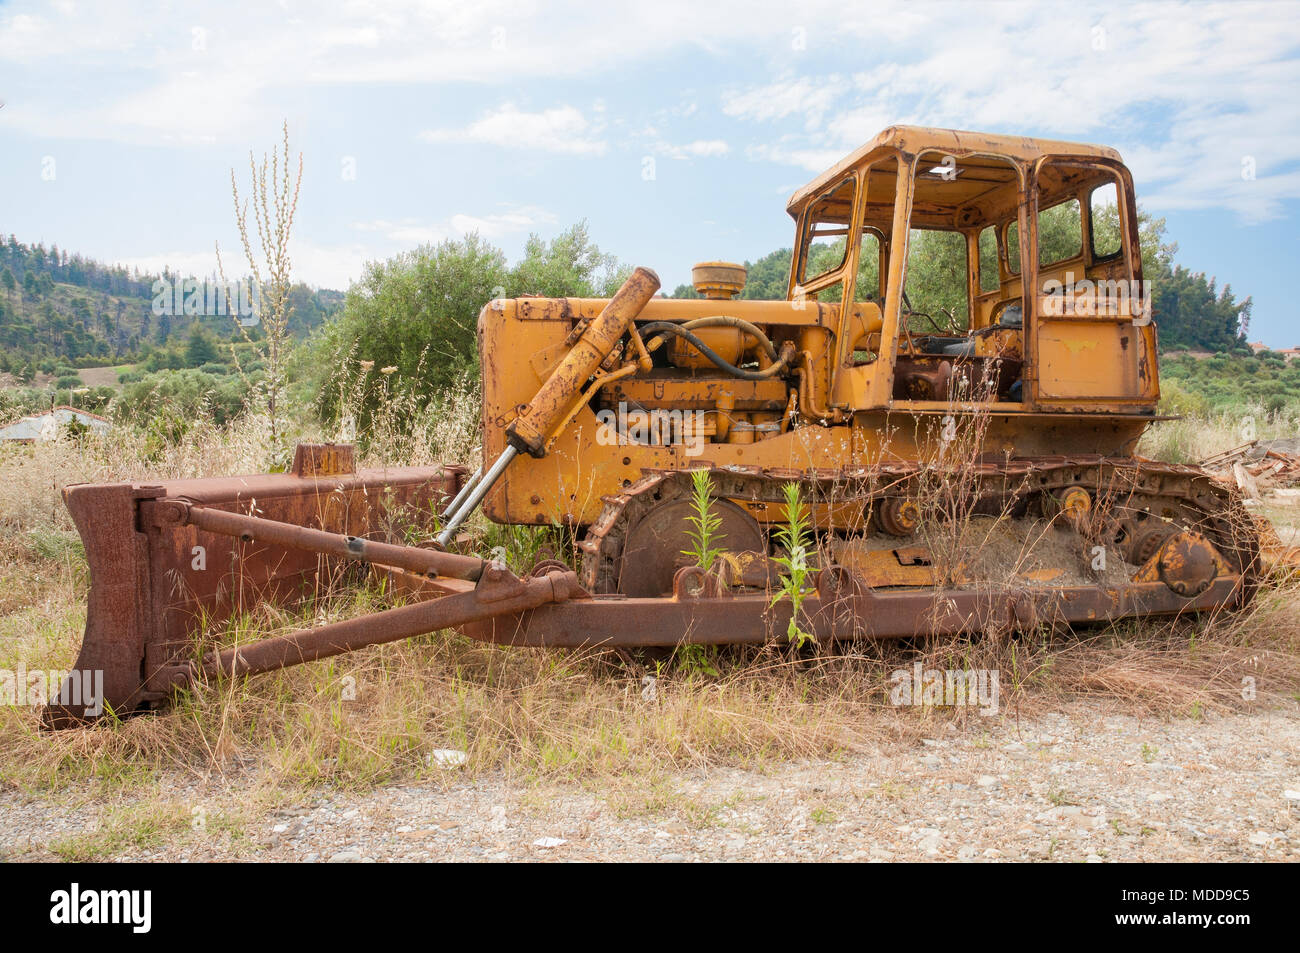 An old rusty Bulldozer abandoned in a field Stock Photo